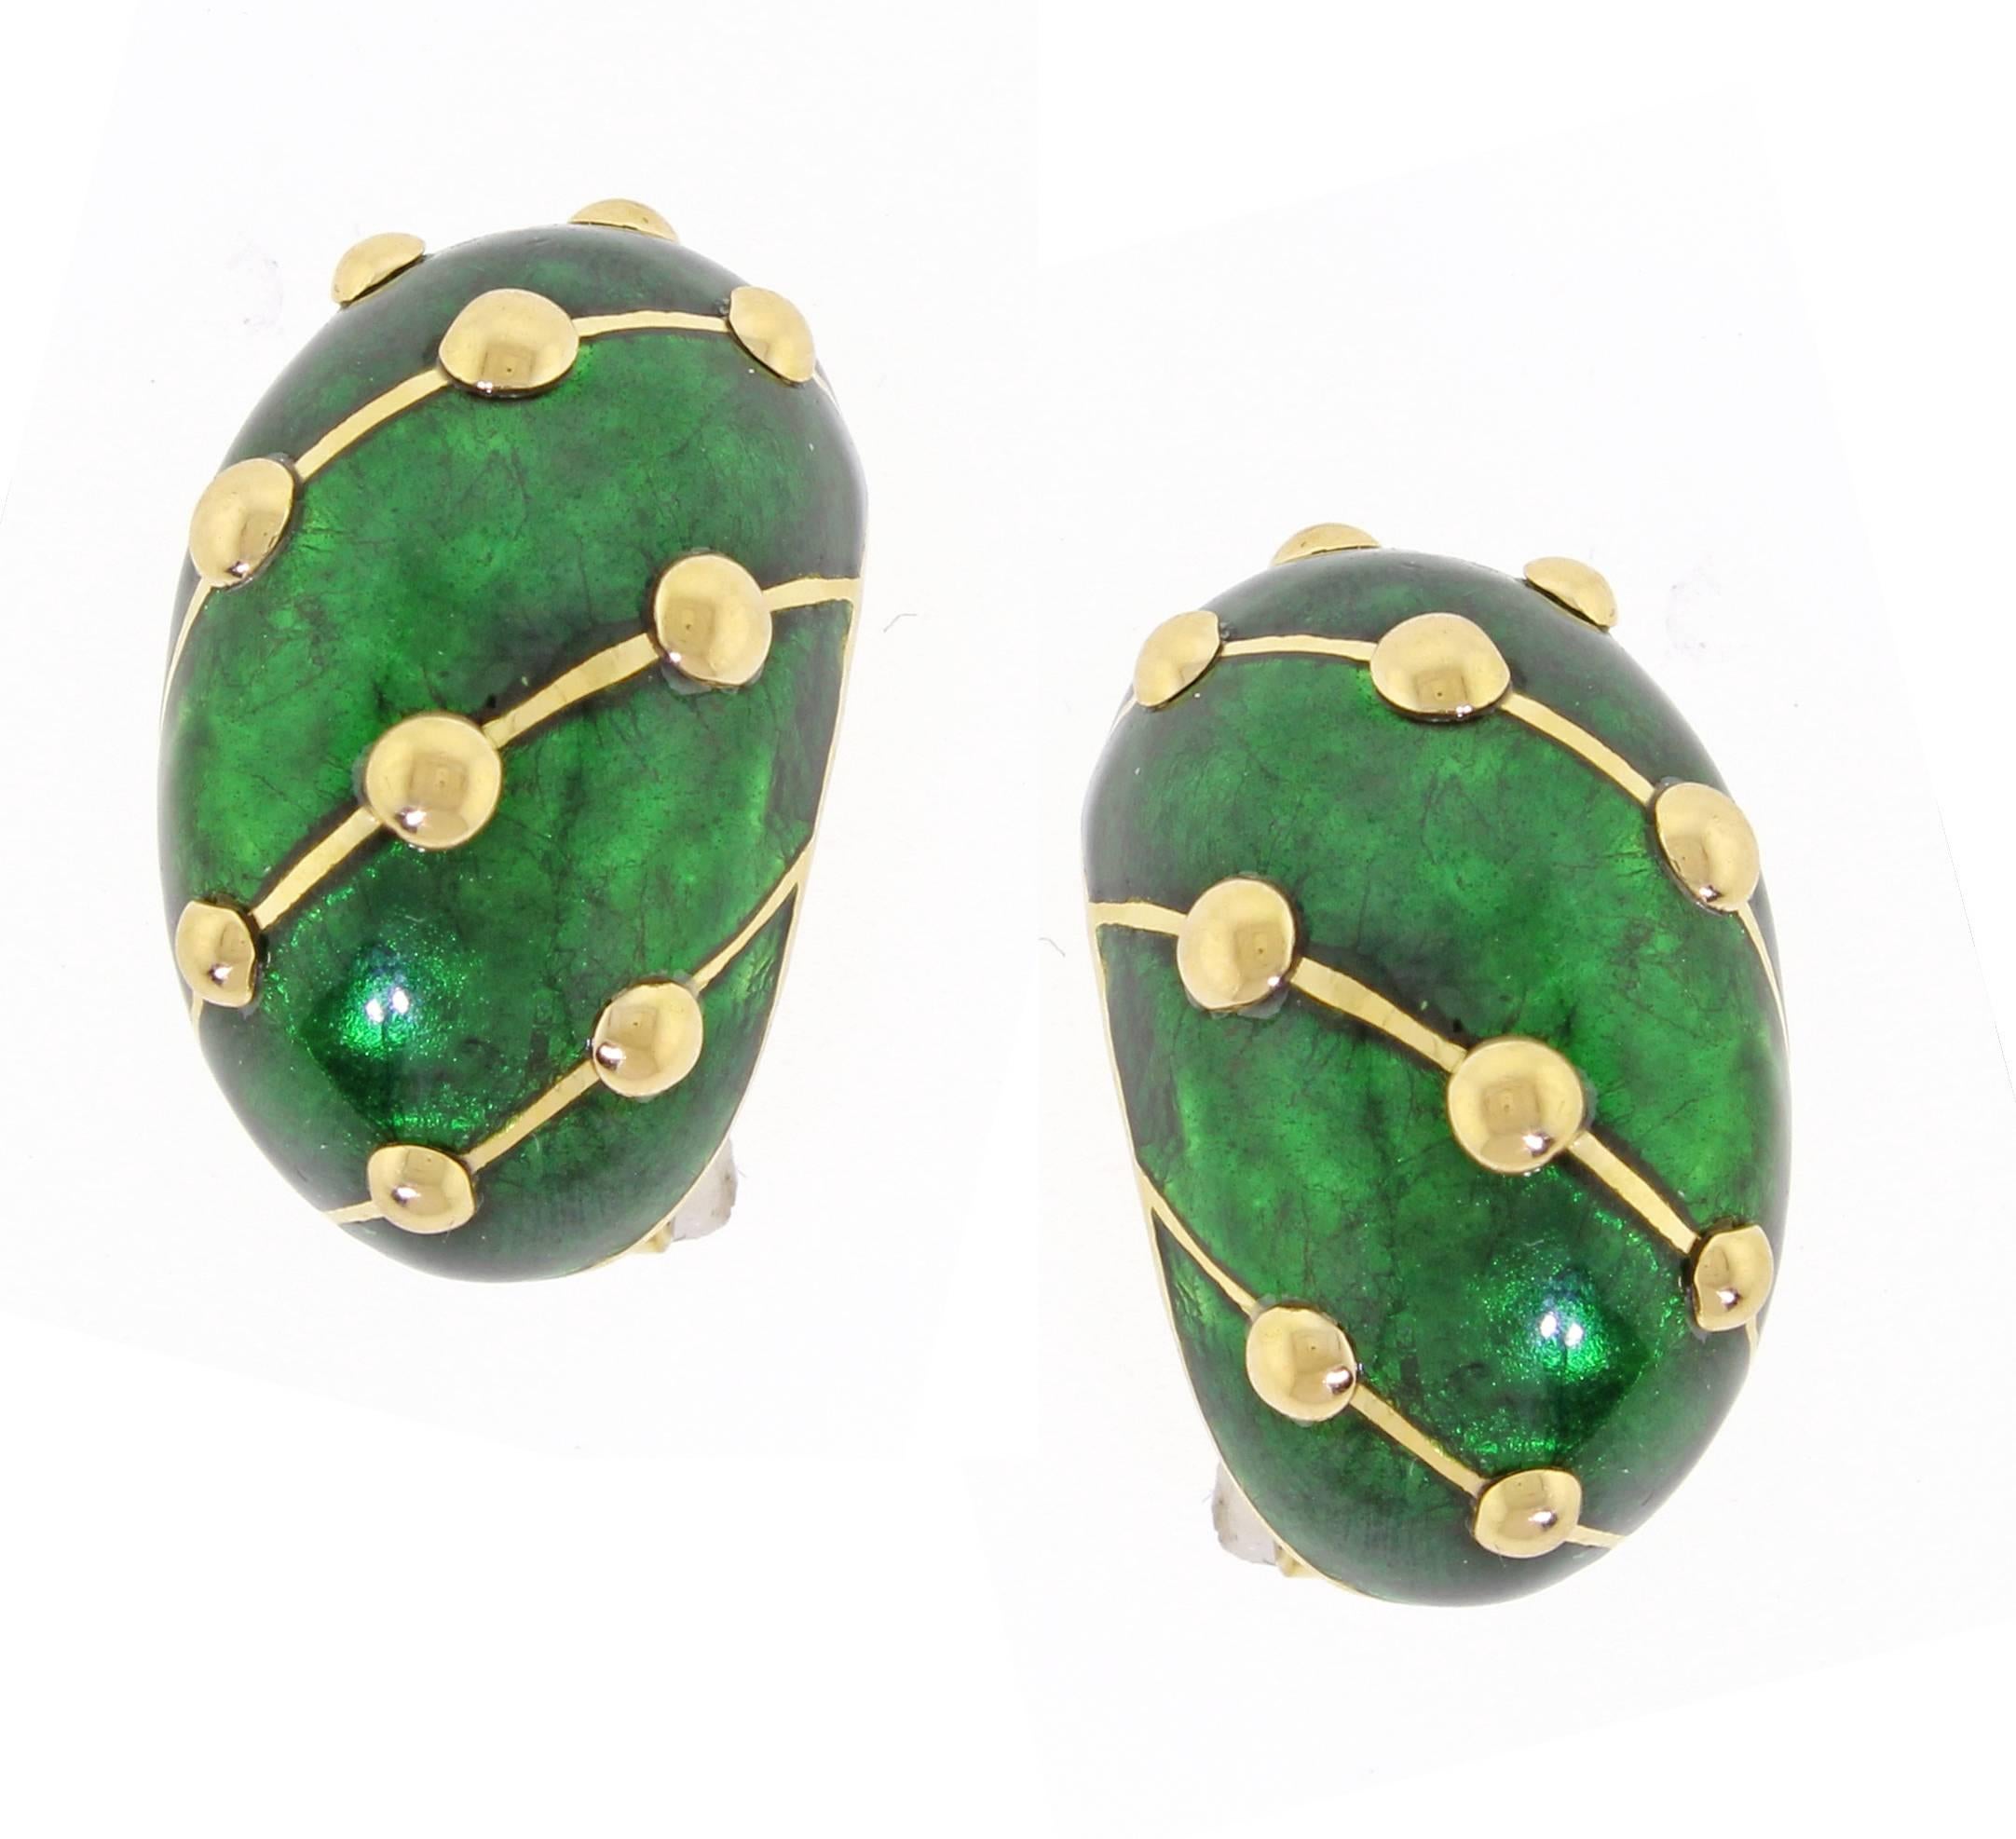 A pair of 18 karat yellow gold and deep green Paillonne enamel earclips by Jean Schlumberger for Tiffany & Co., designed as  half hoops with applied with deep green paillonne enamel accented by polished gold studs and bands.
The Paillonné technique